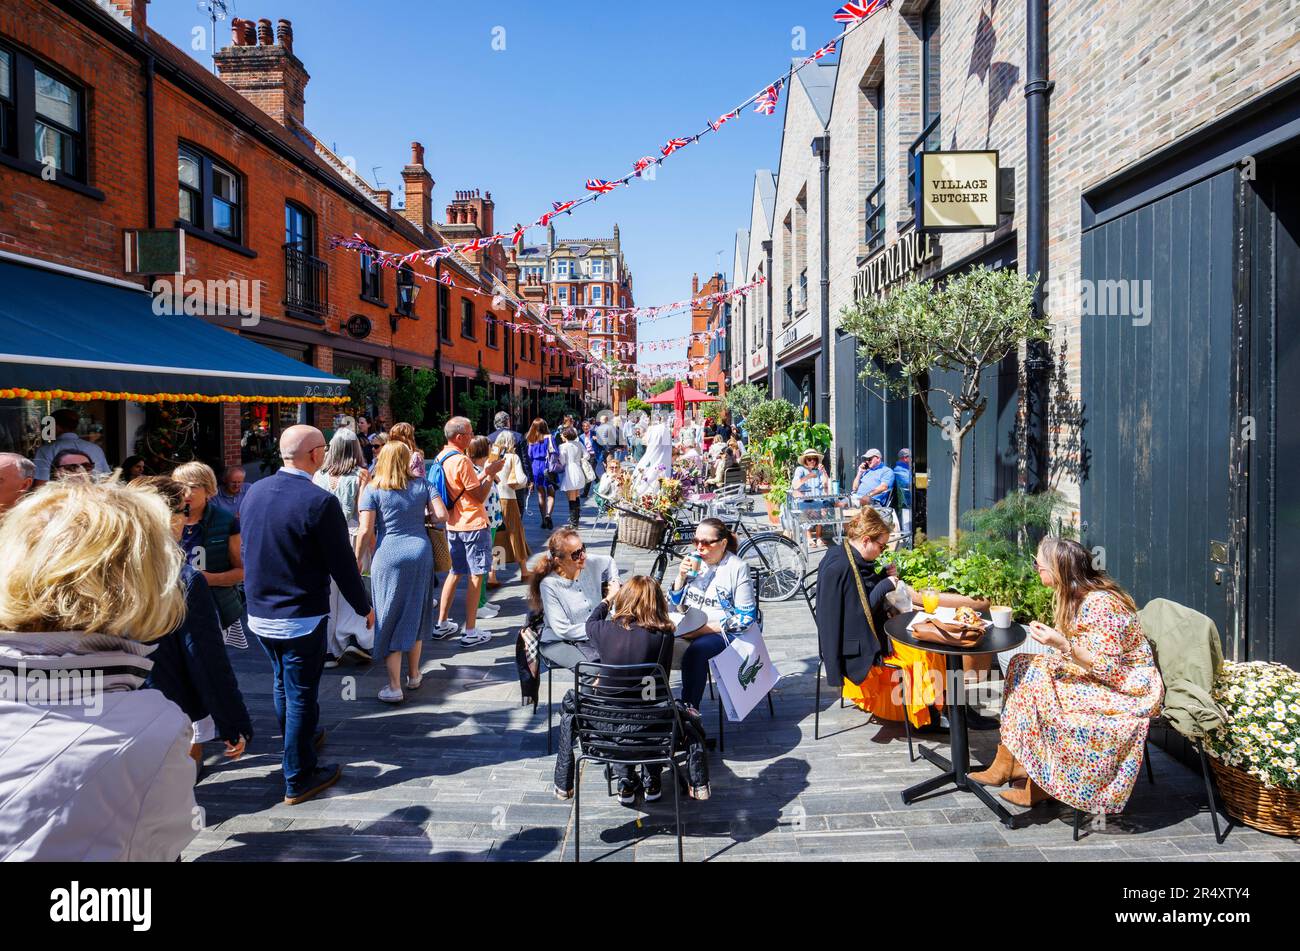 Vibrant roadside cafe culture and restaurants in Symons Street in the Sloane Square area of London SW3 on a sunny day during the Chelsea Flower Show Stock Photo